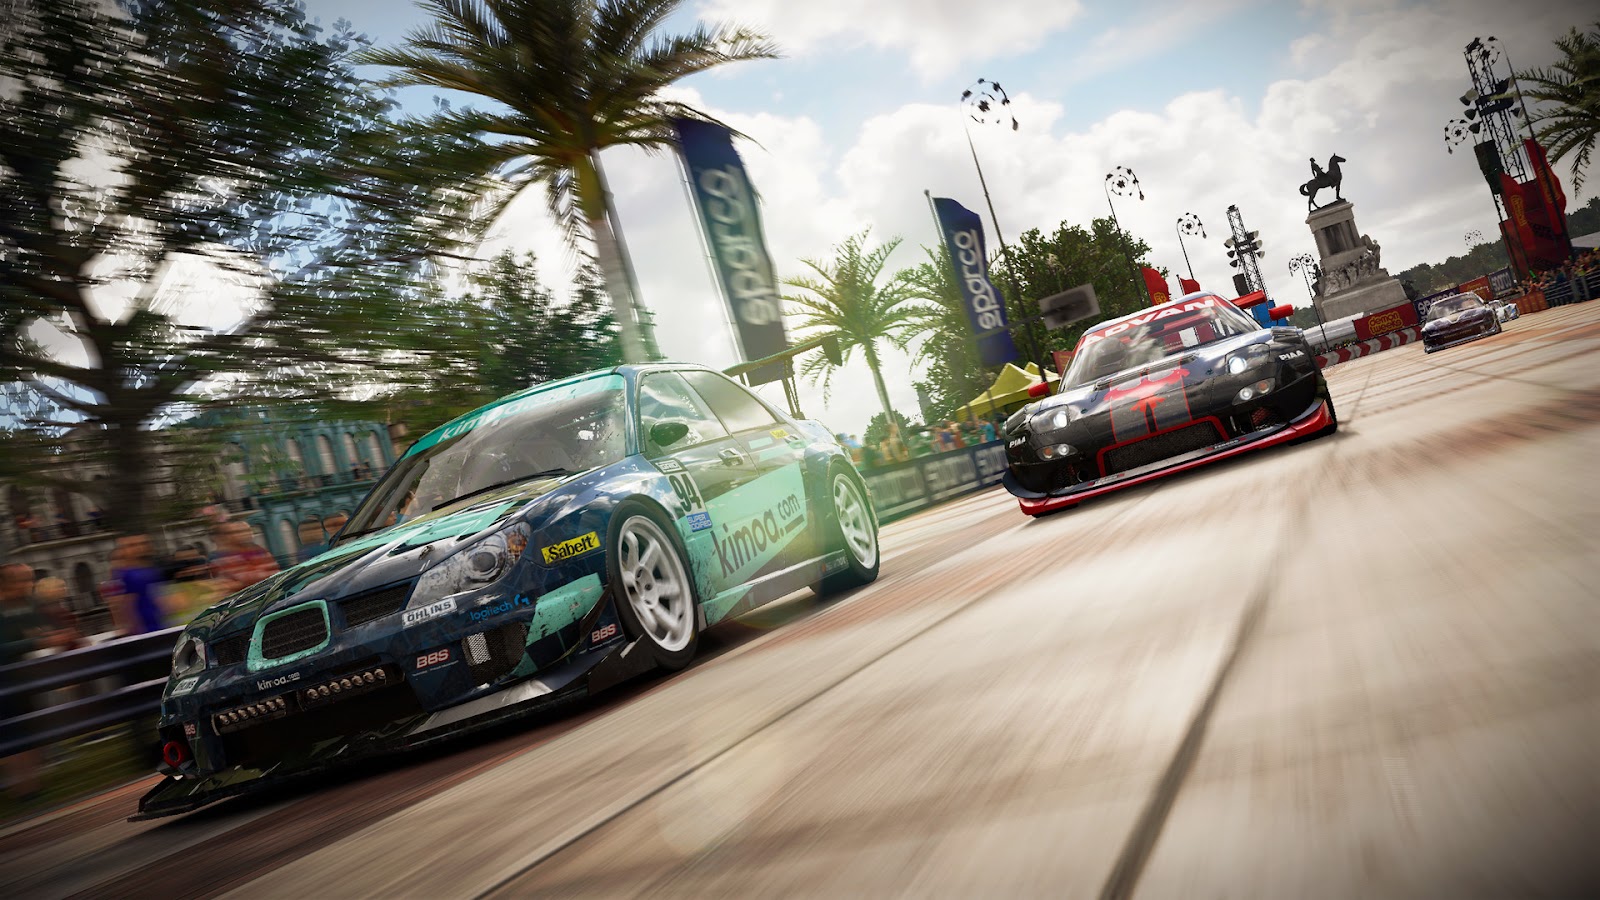 Image of a race from Grid game